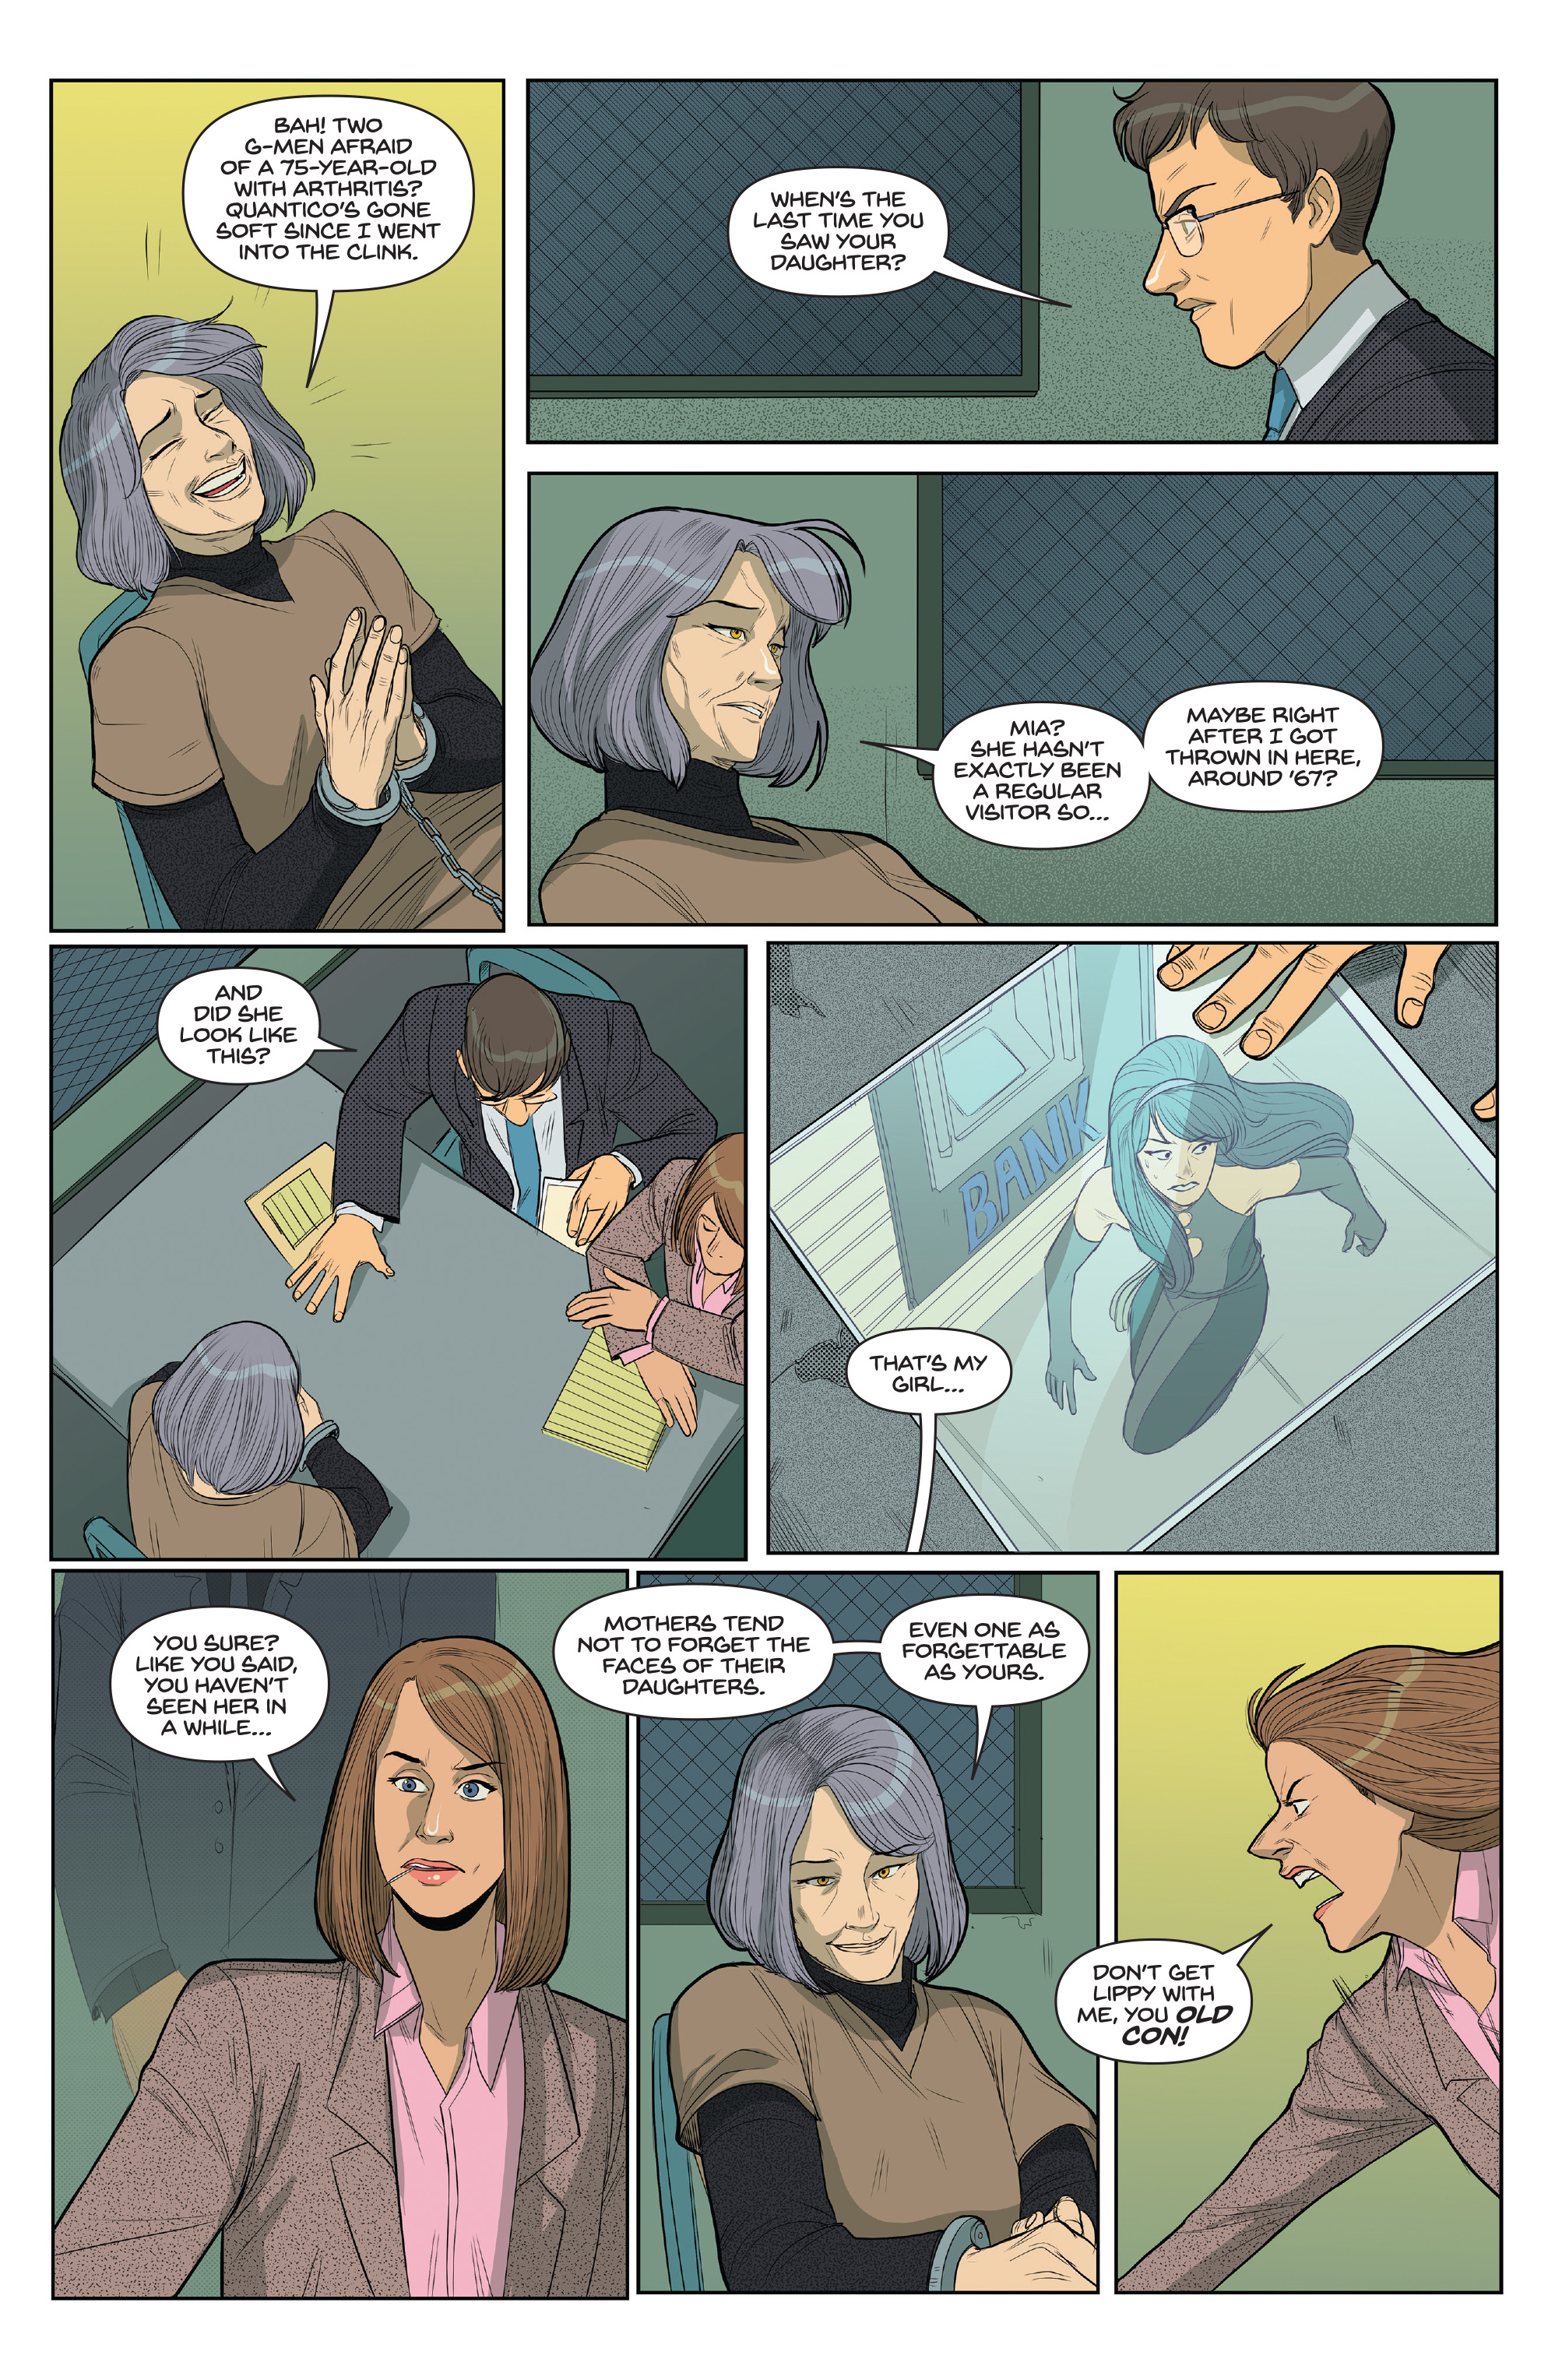 Smooth Criminals (2018-): Chapter 4 - Page 4